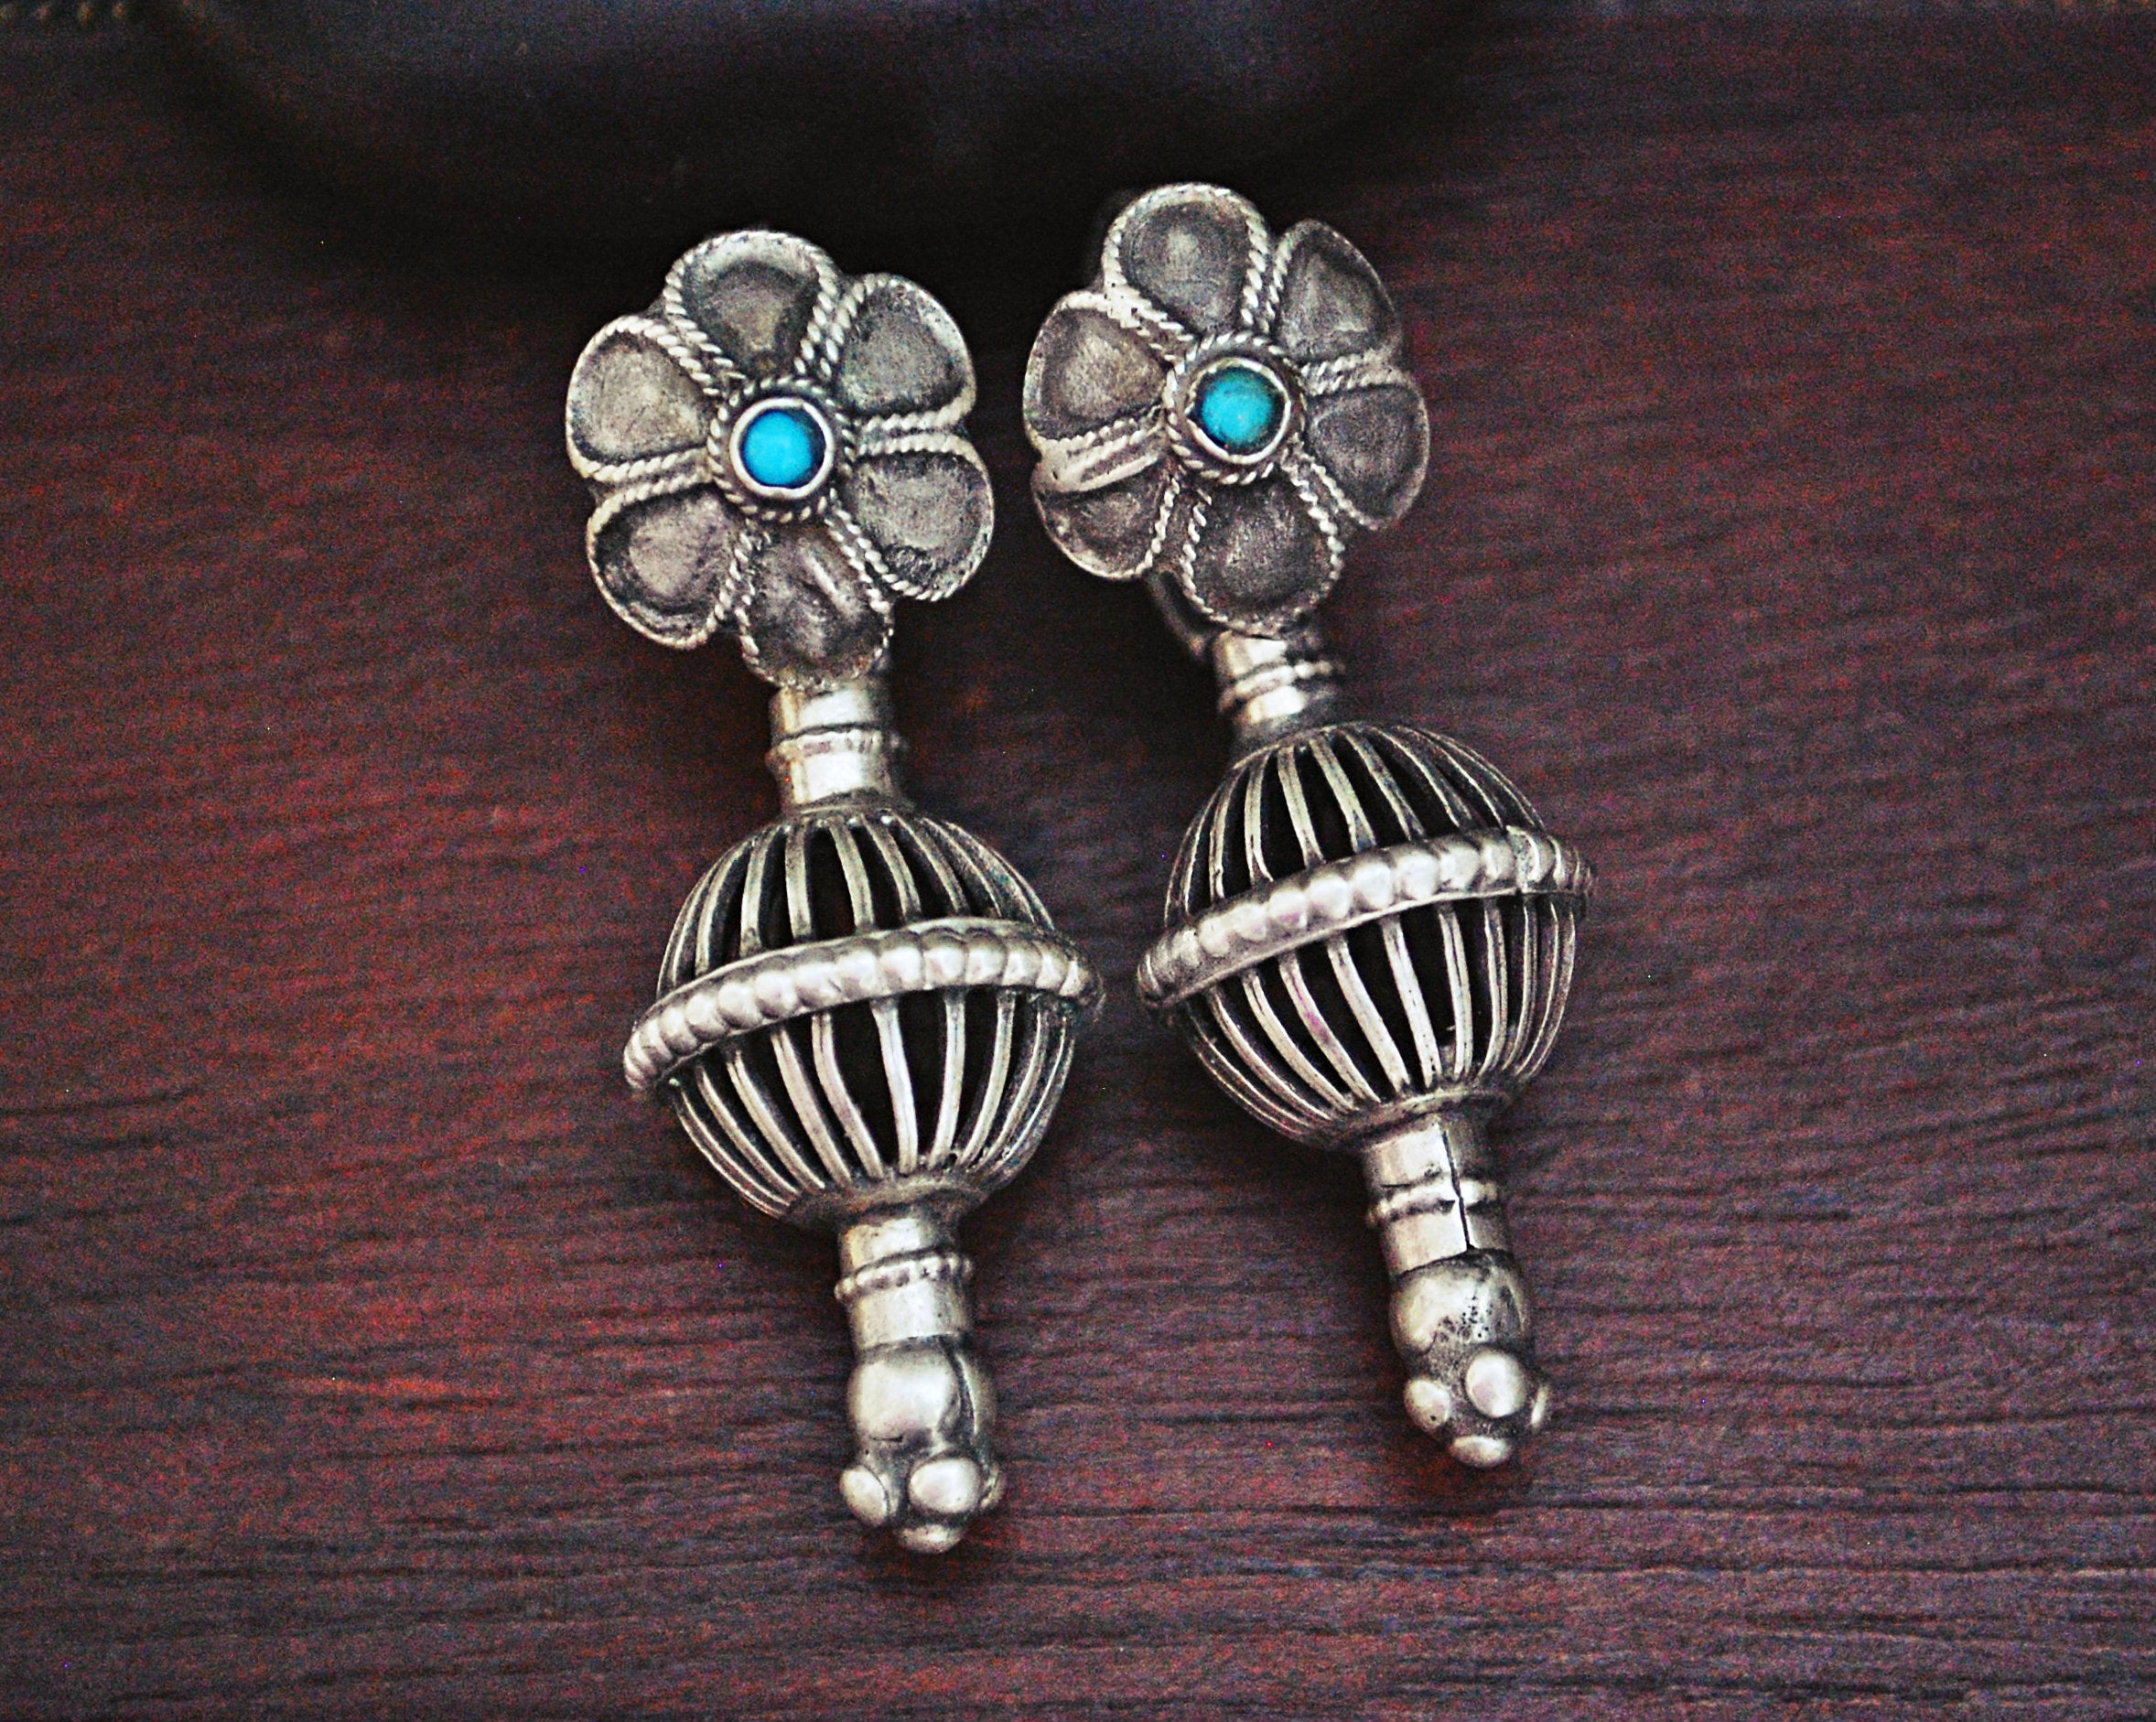 Old Gujarati Earrings with Turquoise